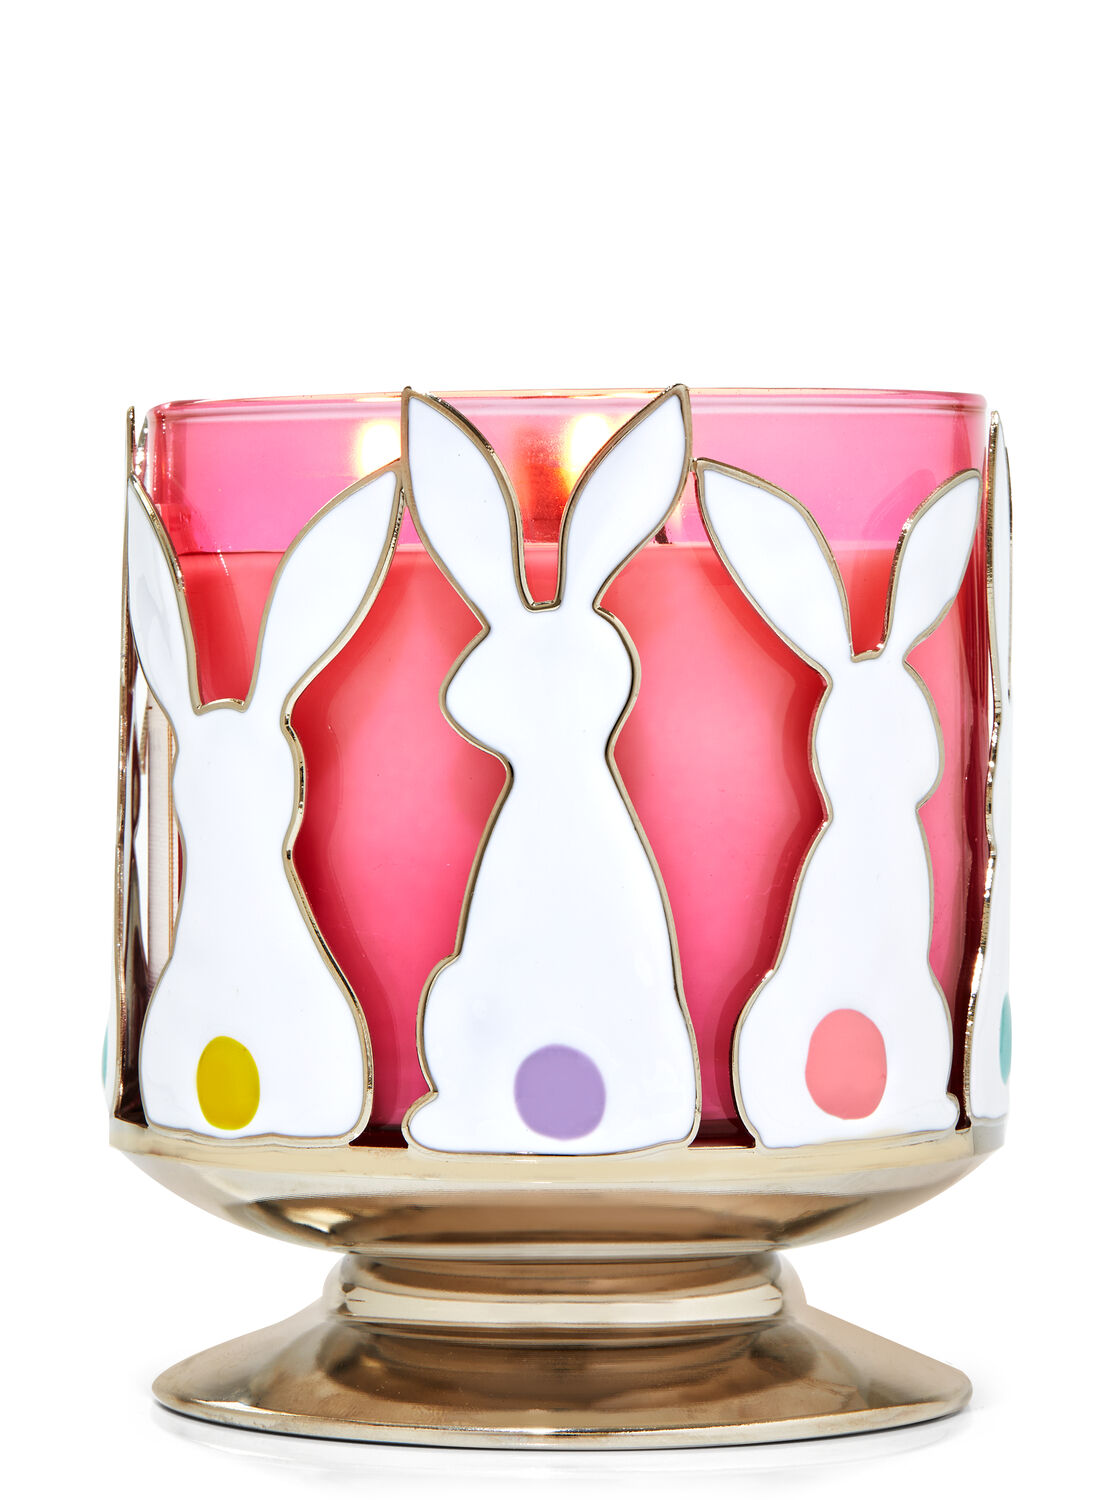 NEW BATH & BODY WORKS EASTER BUNNY EGGS METAL LARGE 3 WICK CANDLE HOLDER 14.5 OZ 